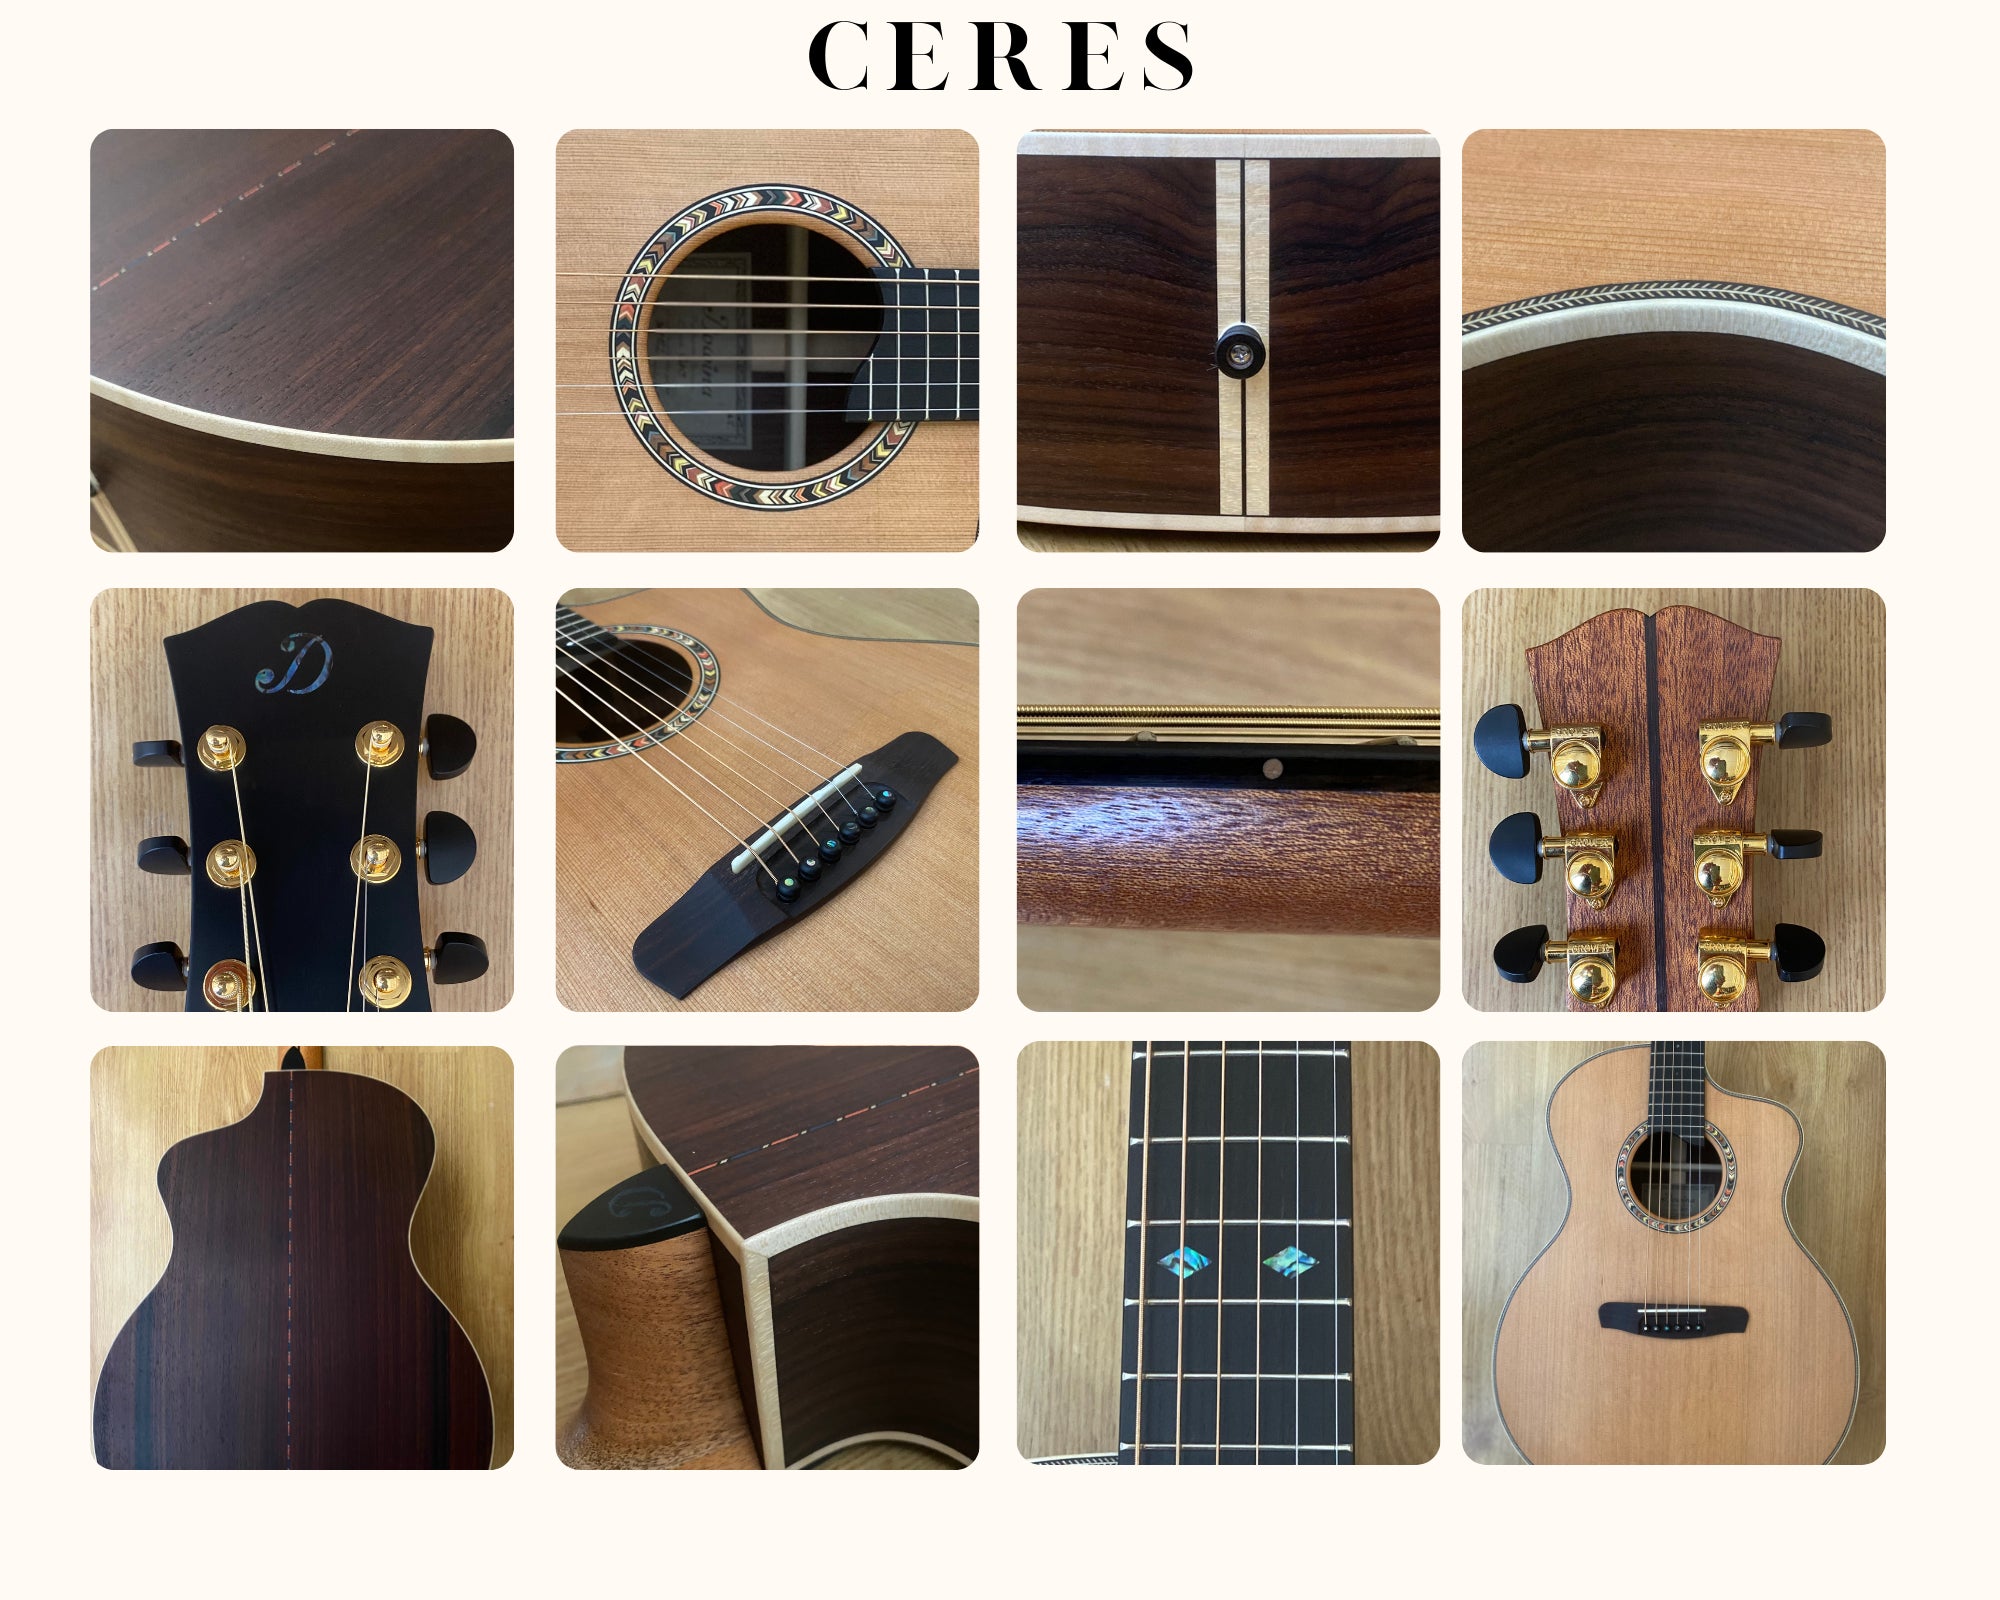 Dowina Rosewood (Ceres) GAC-S (Used), Acoustic Guitar for sale at Richards Guitars.